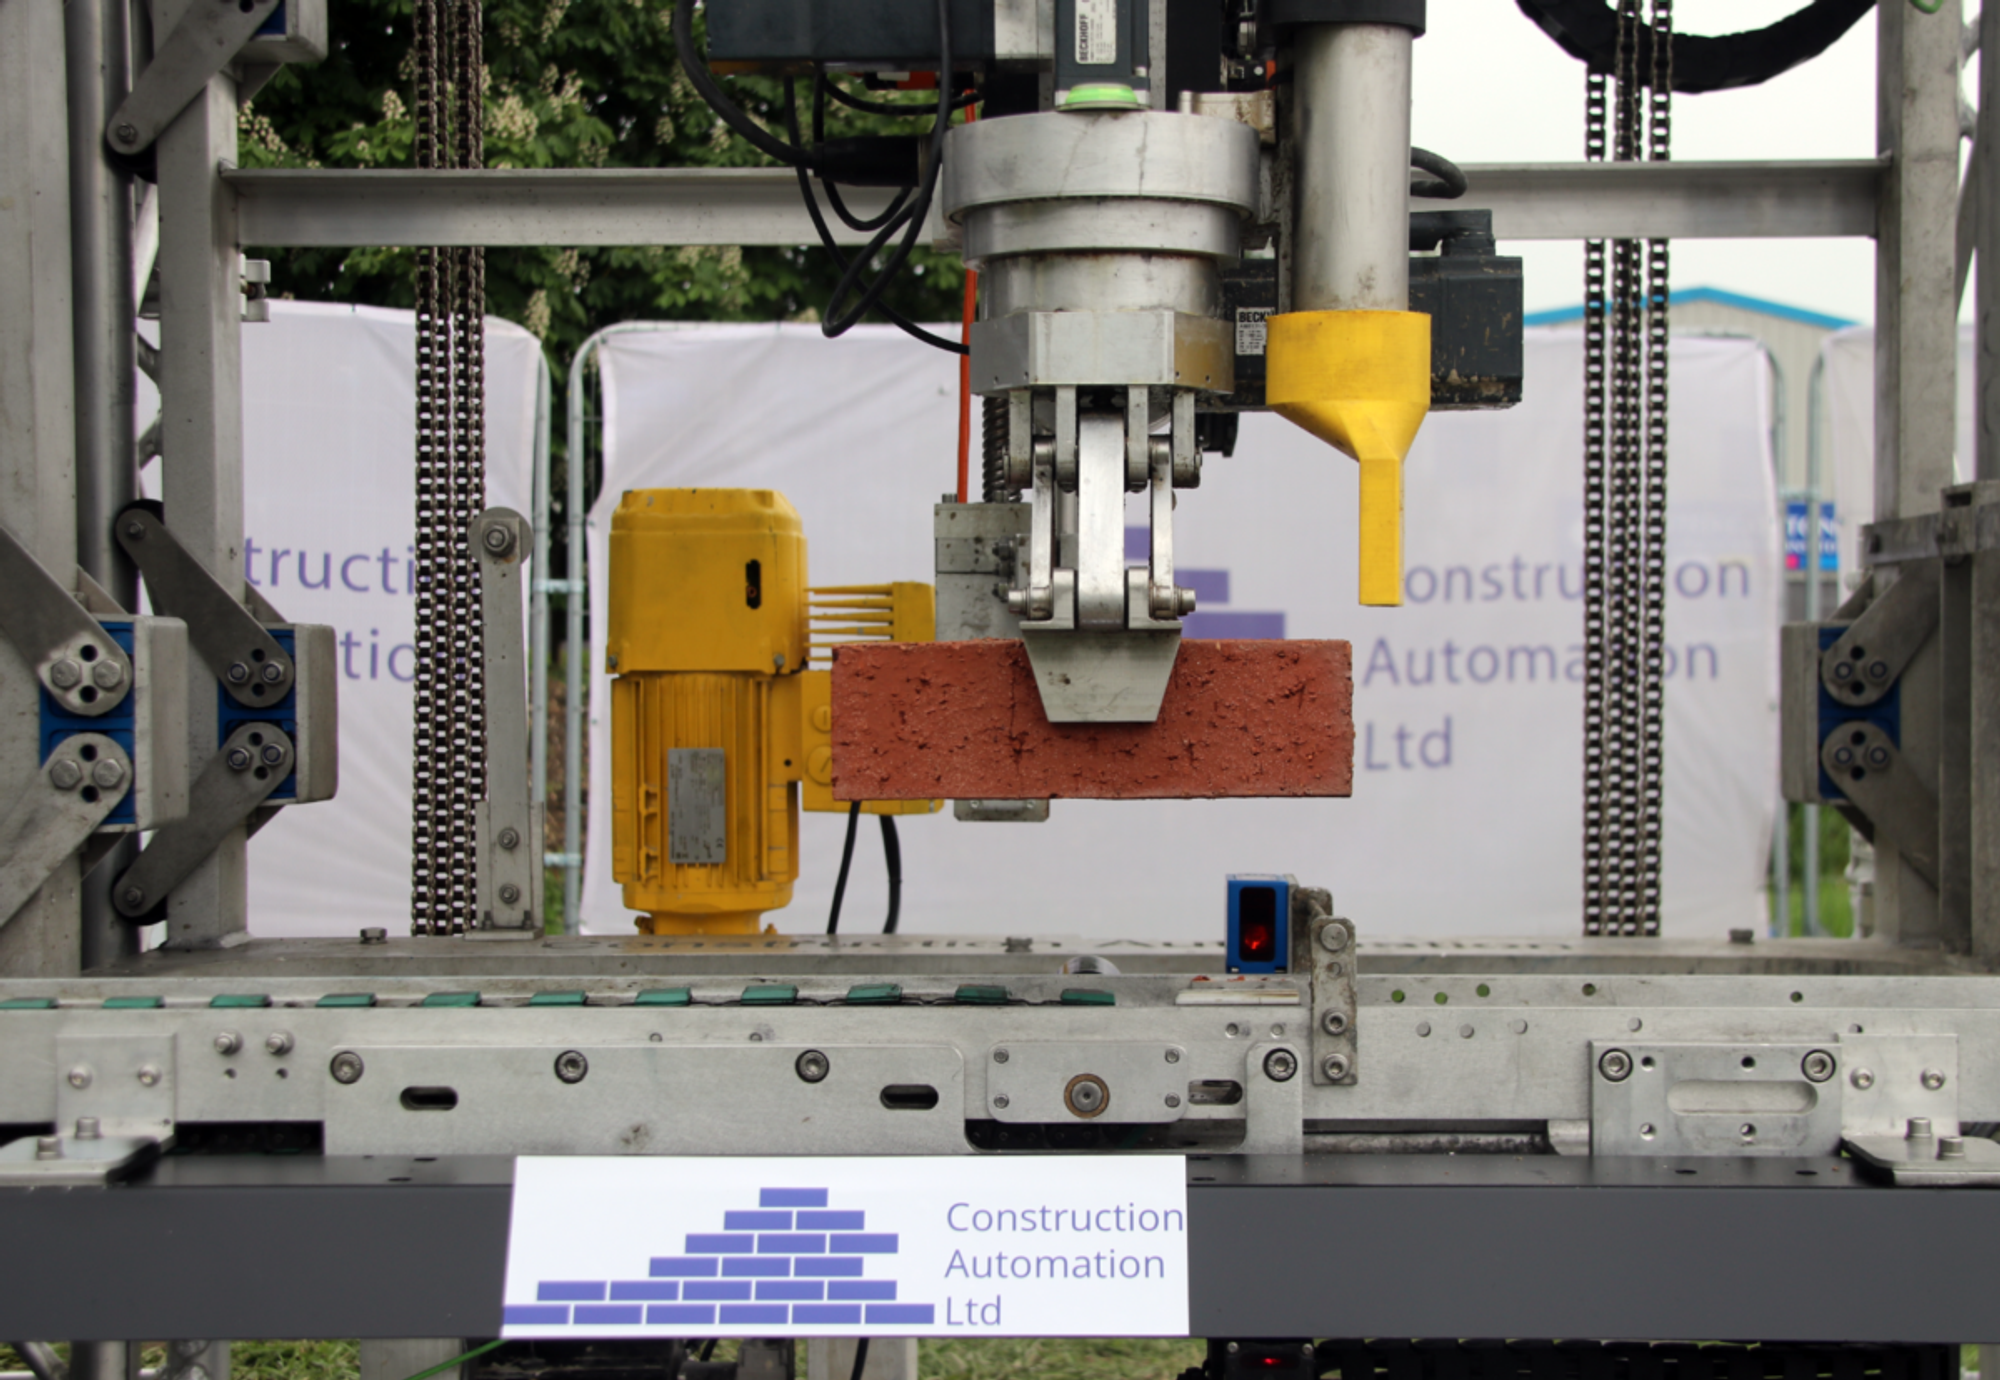 Brick-laying robot gets approval from NHBC | Construction Enquirer News